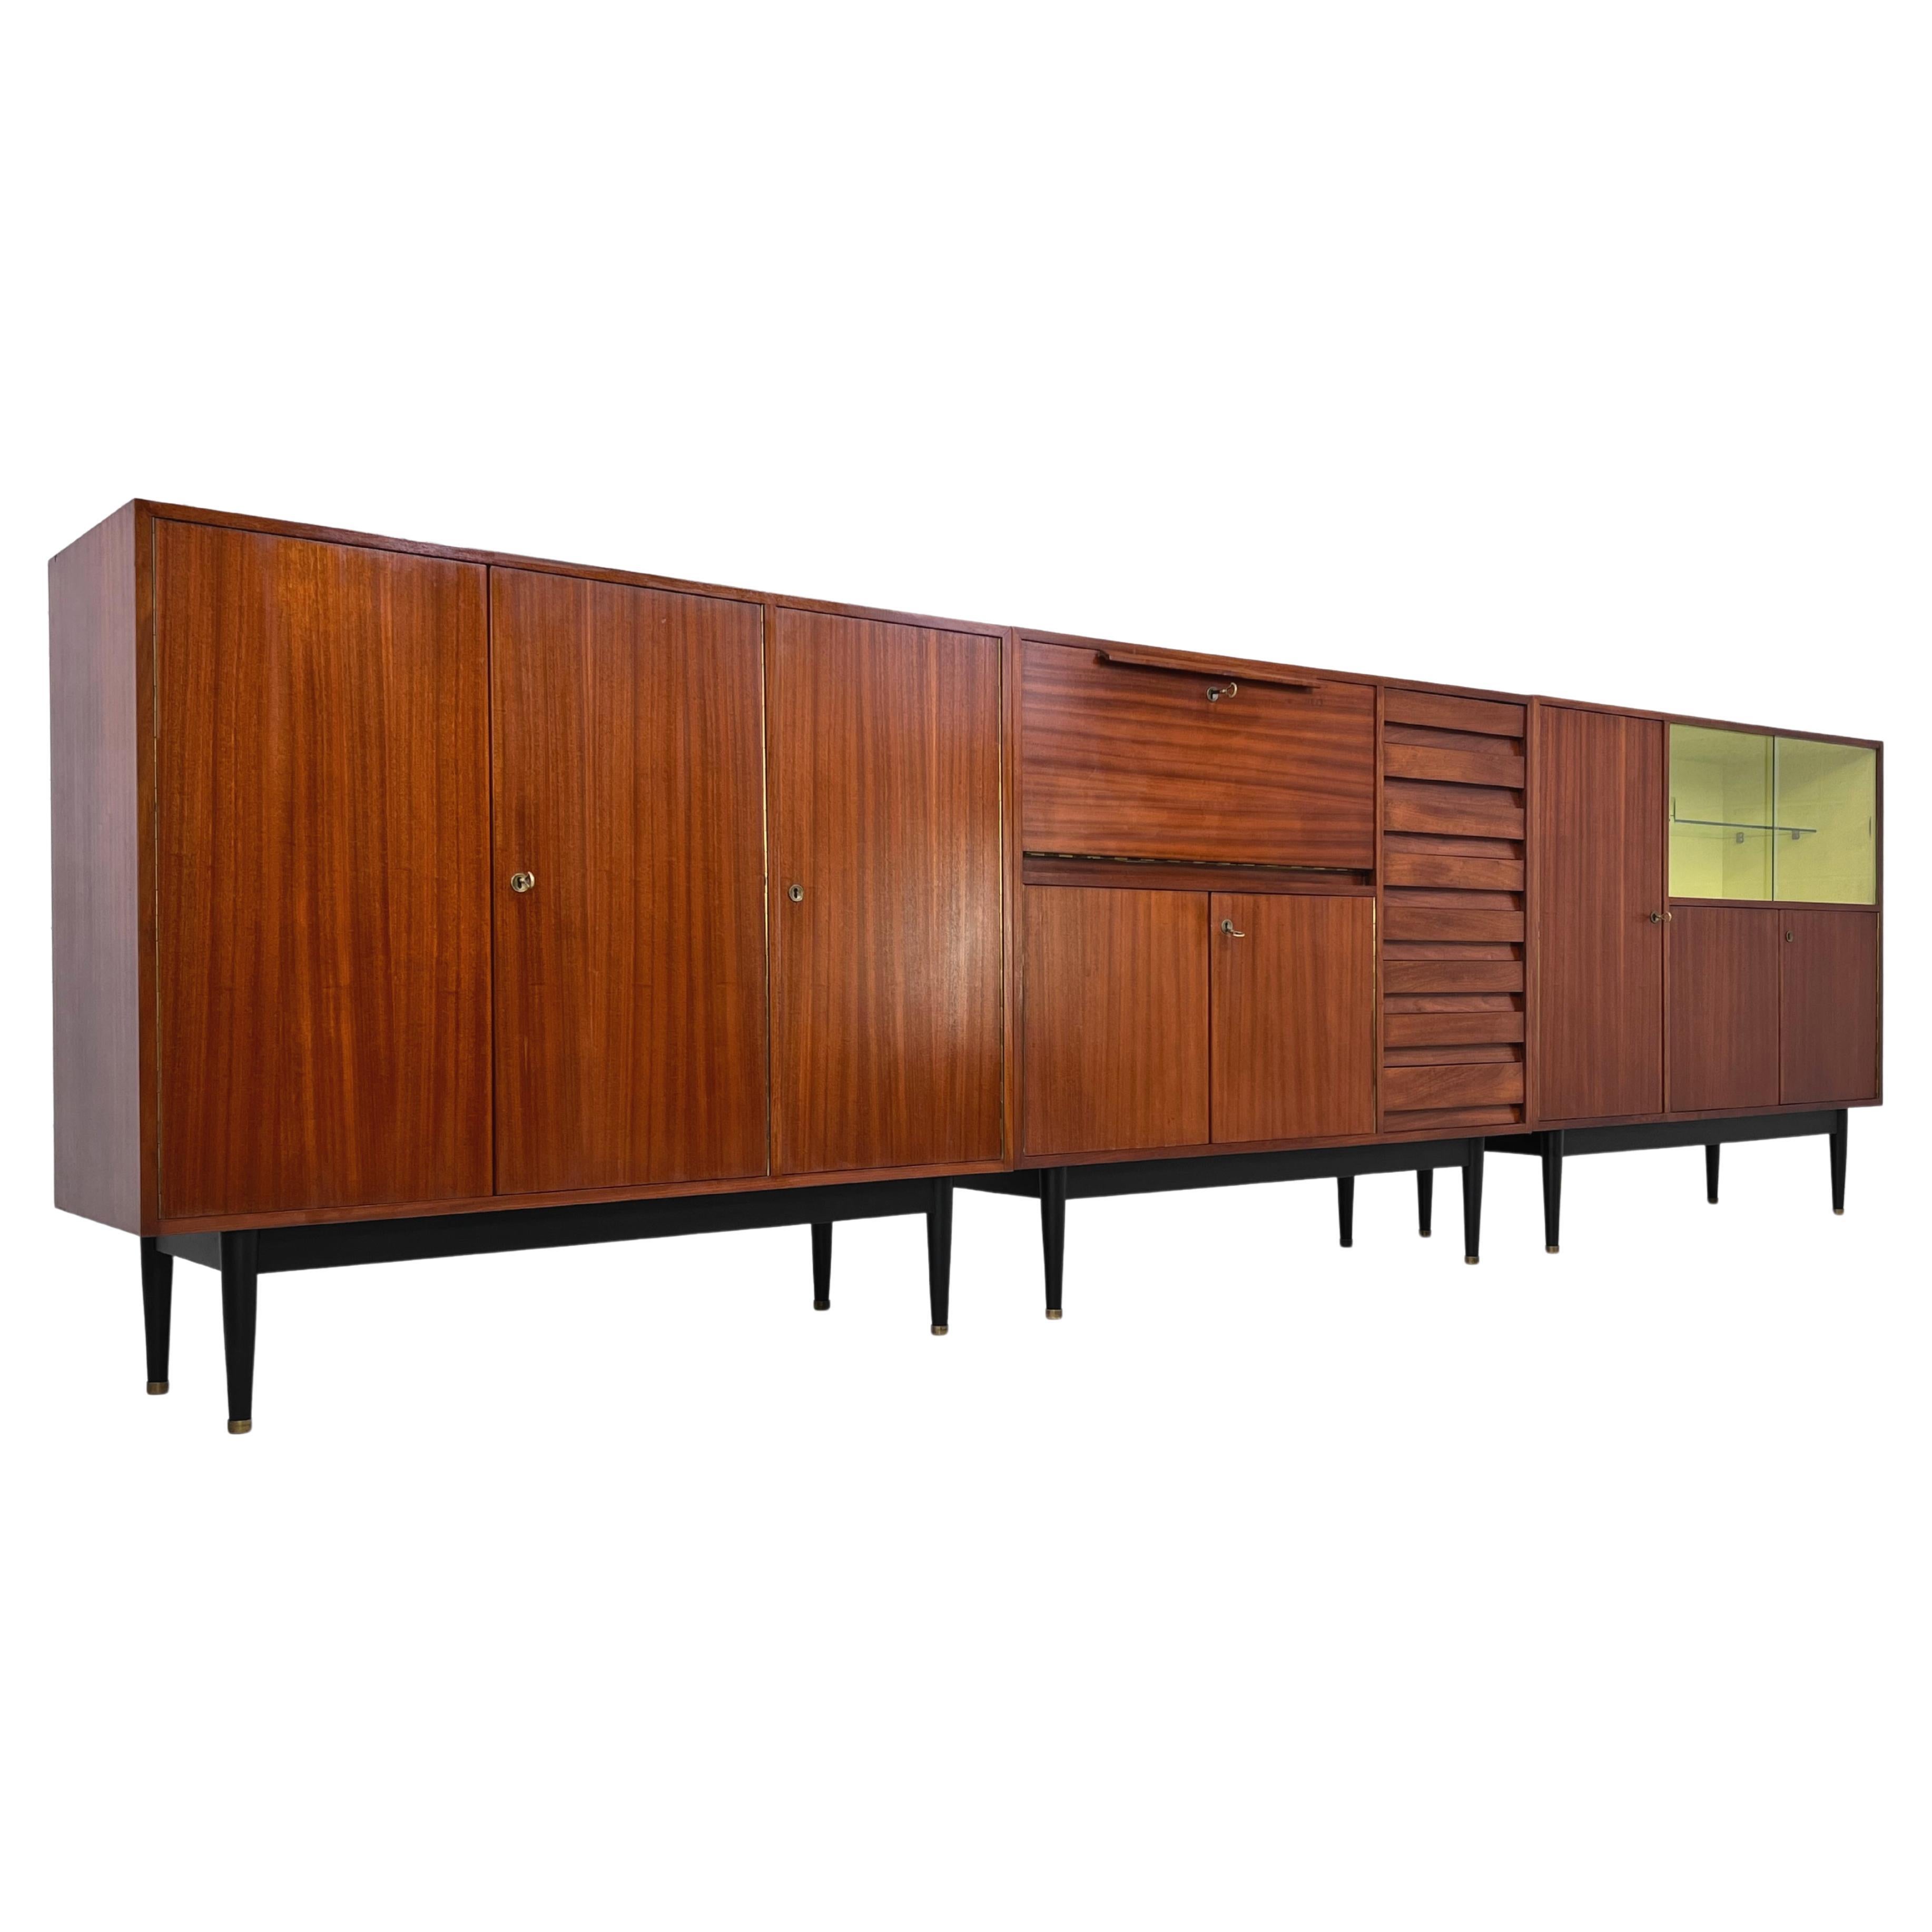 1950s - 1960s Jos DEN Design Modular Sideboard Or Midboard Cabinets trio Set from 